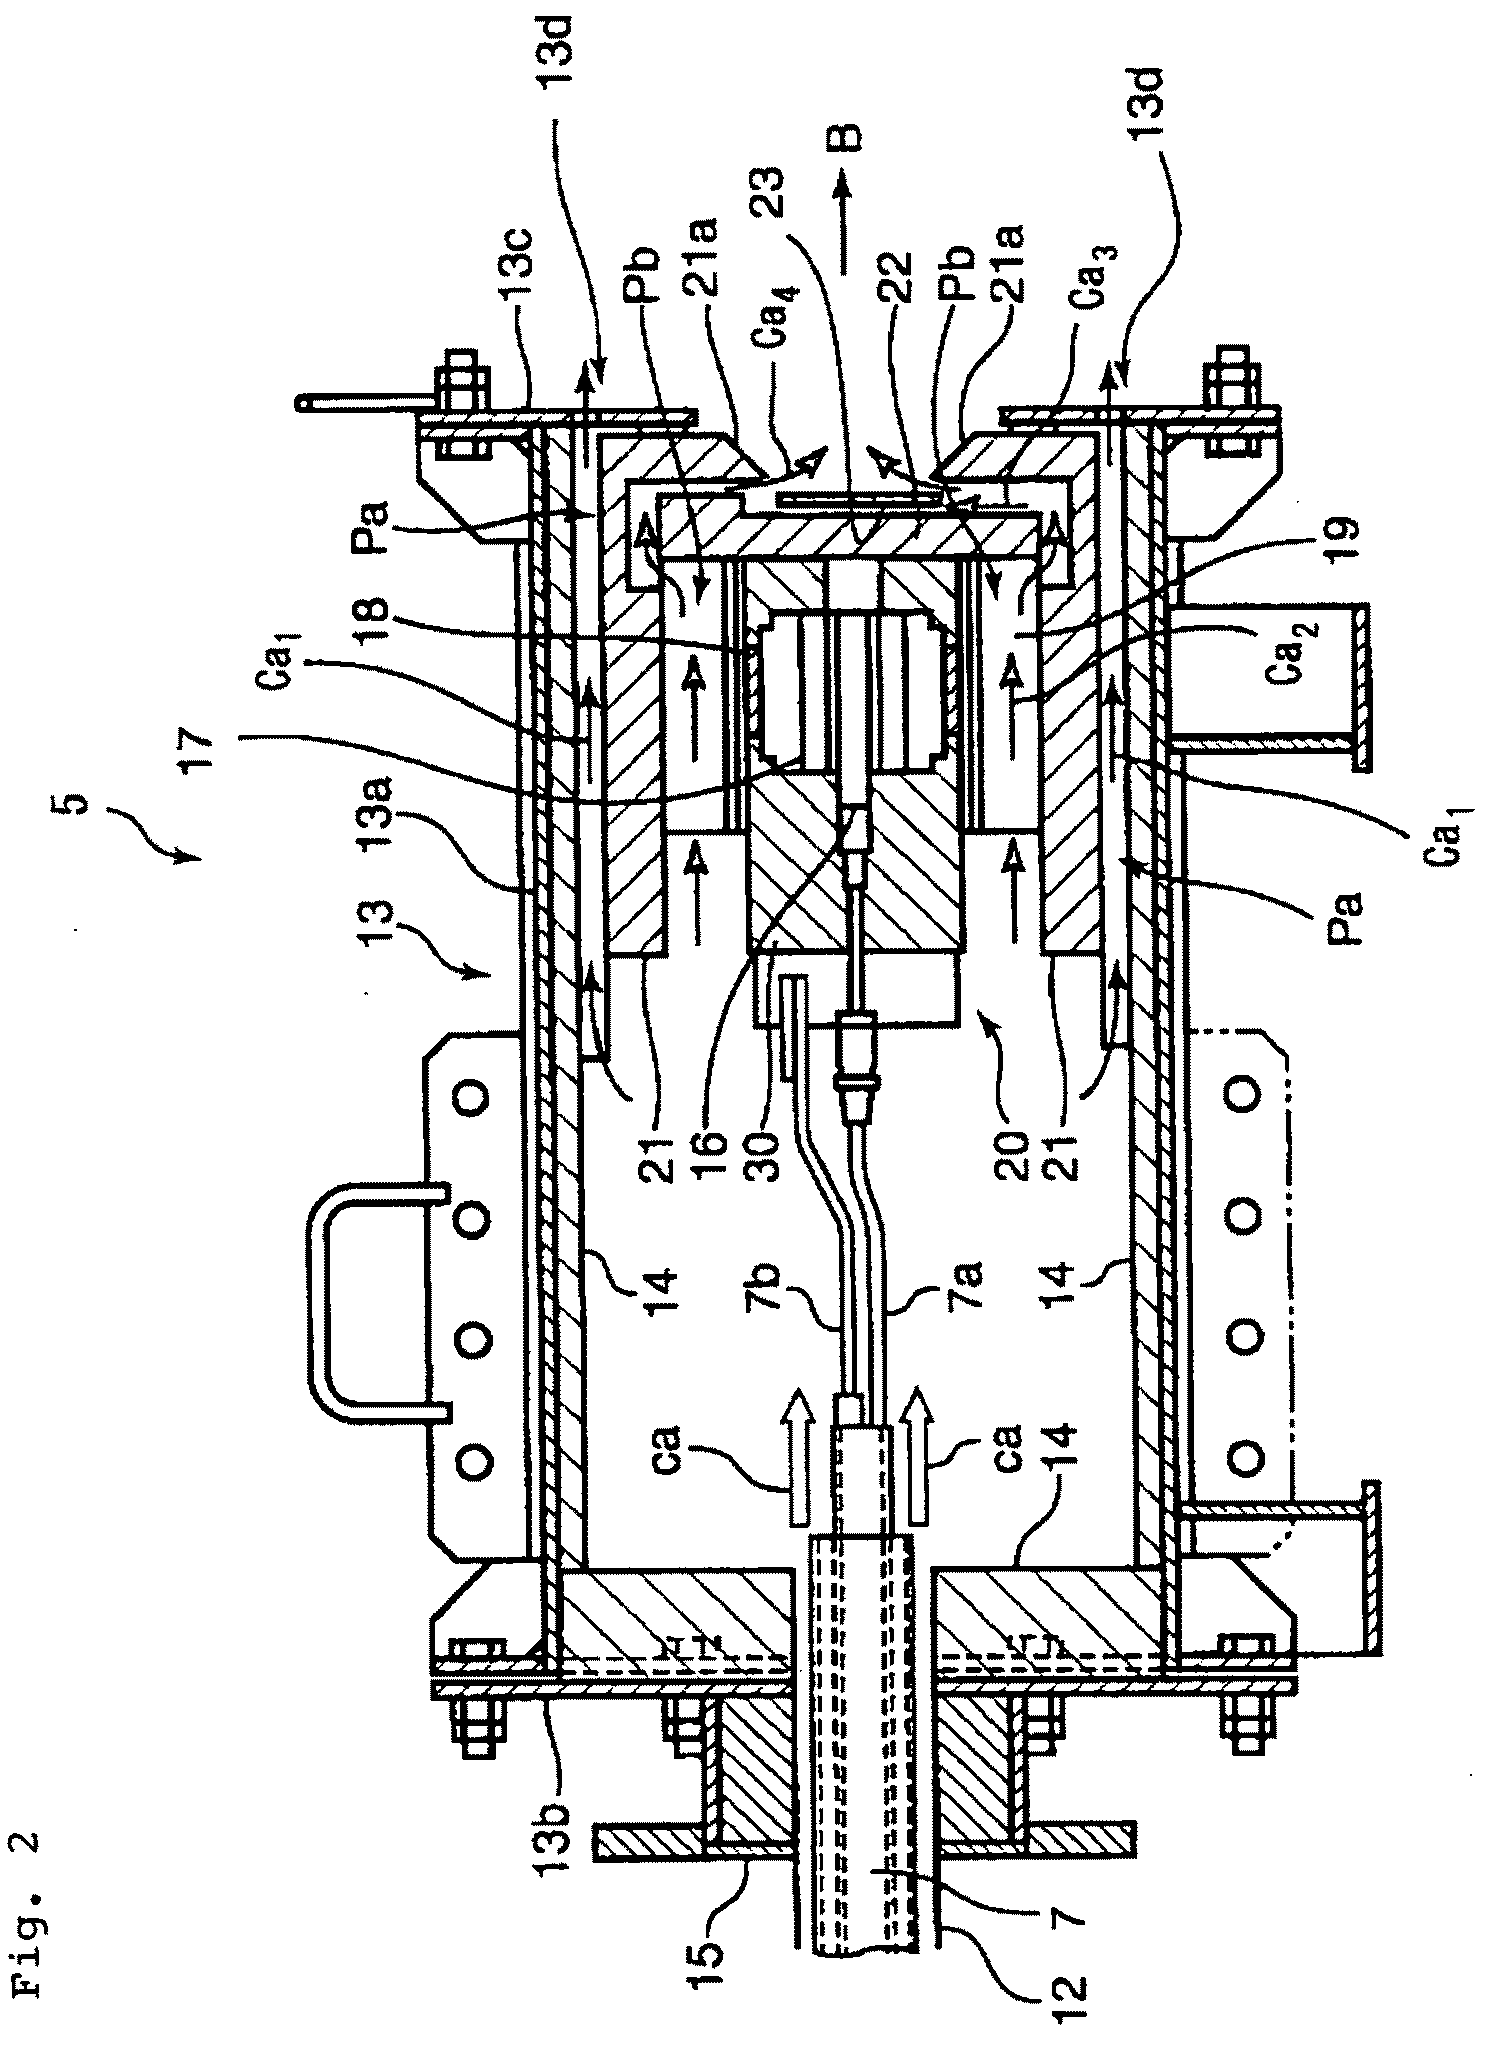 Oven Observing Equipment and Push-Out Ram Having the Same